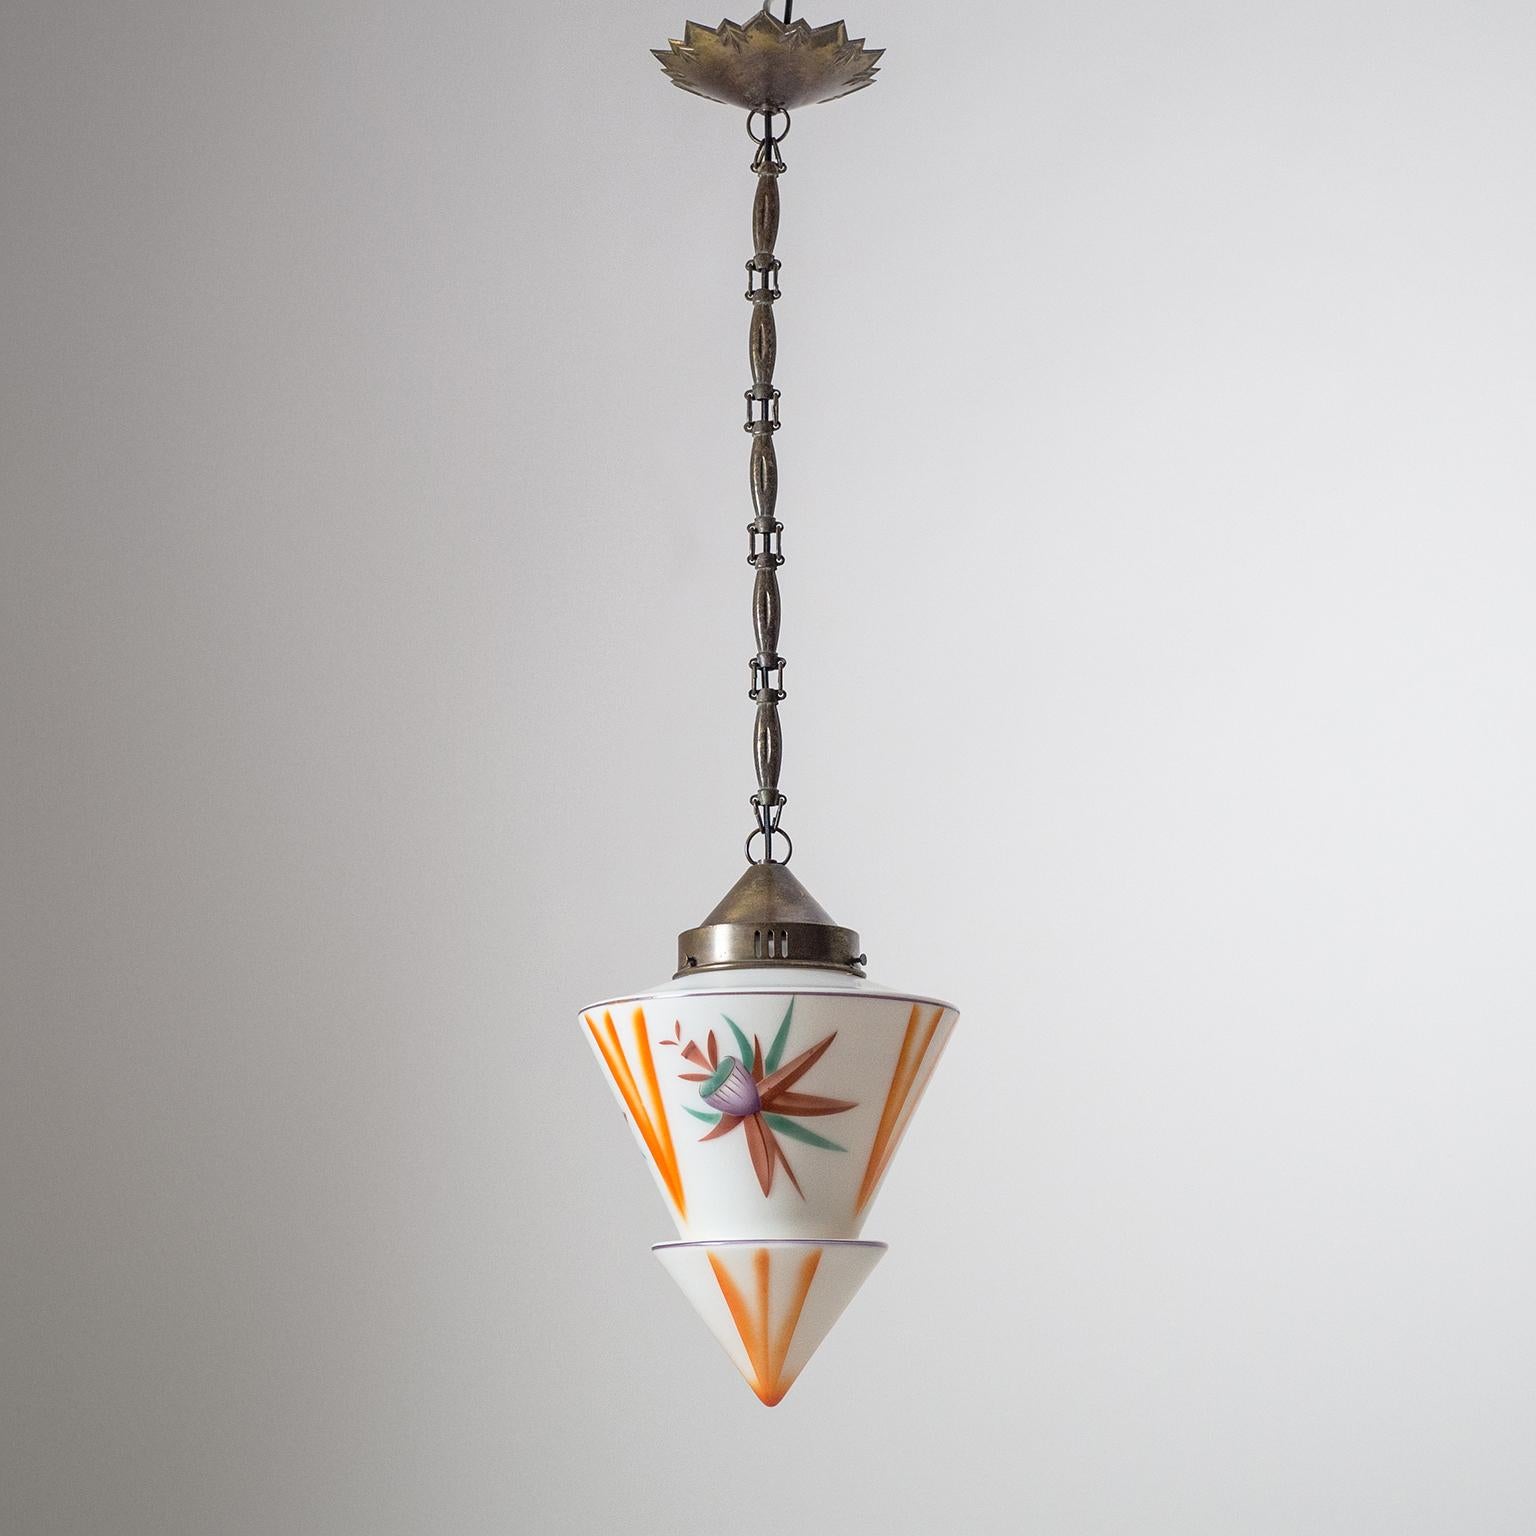 Rare and very unique Art Deco pendant, circa 1920, with enameled glass and brass. The tiered conical satin glass diffuser has an abstracted floral decor applied in aerography technique (an early precursor to airbrushing). Very nice original